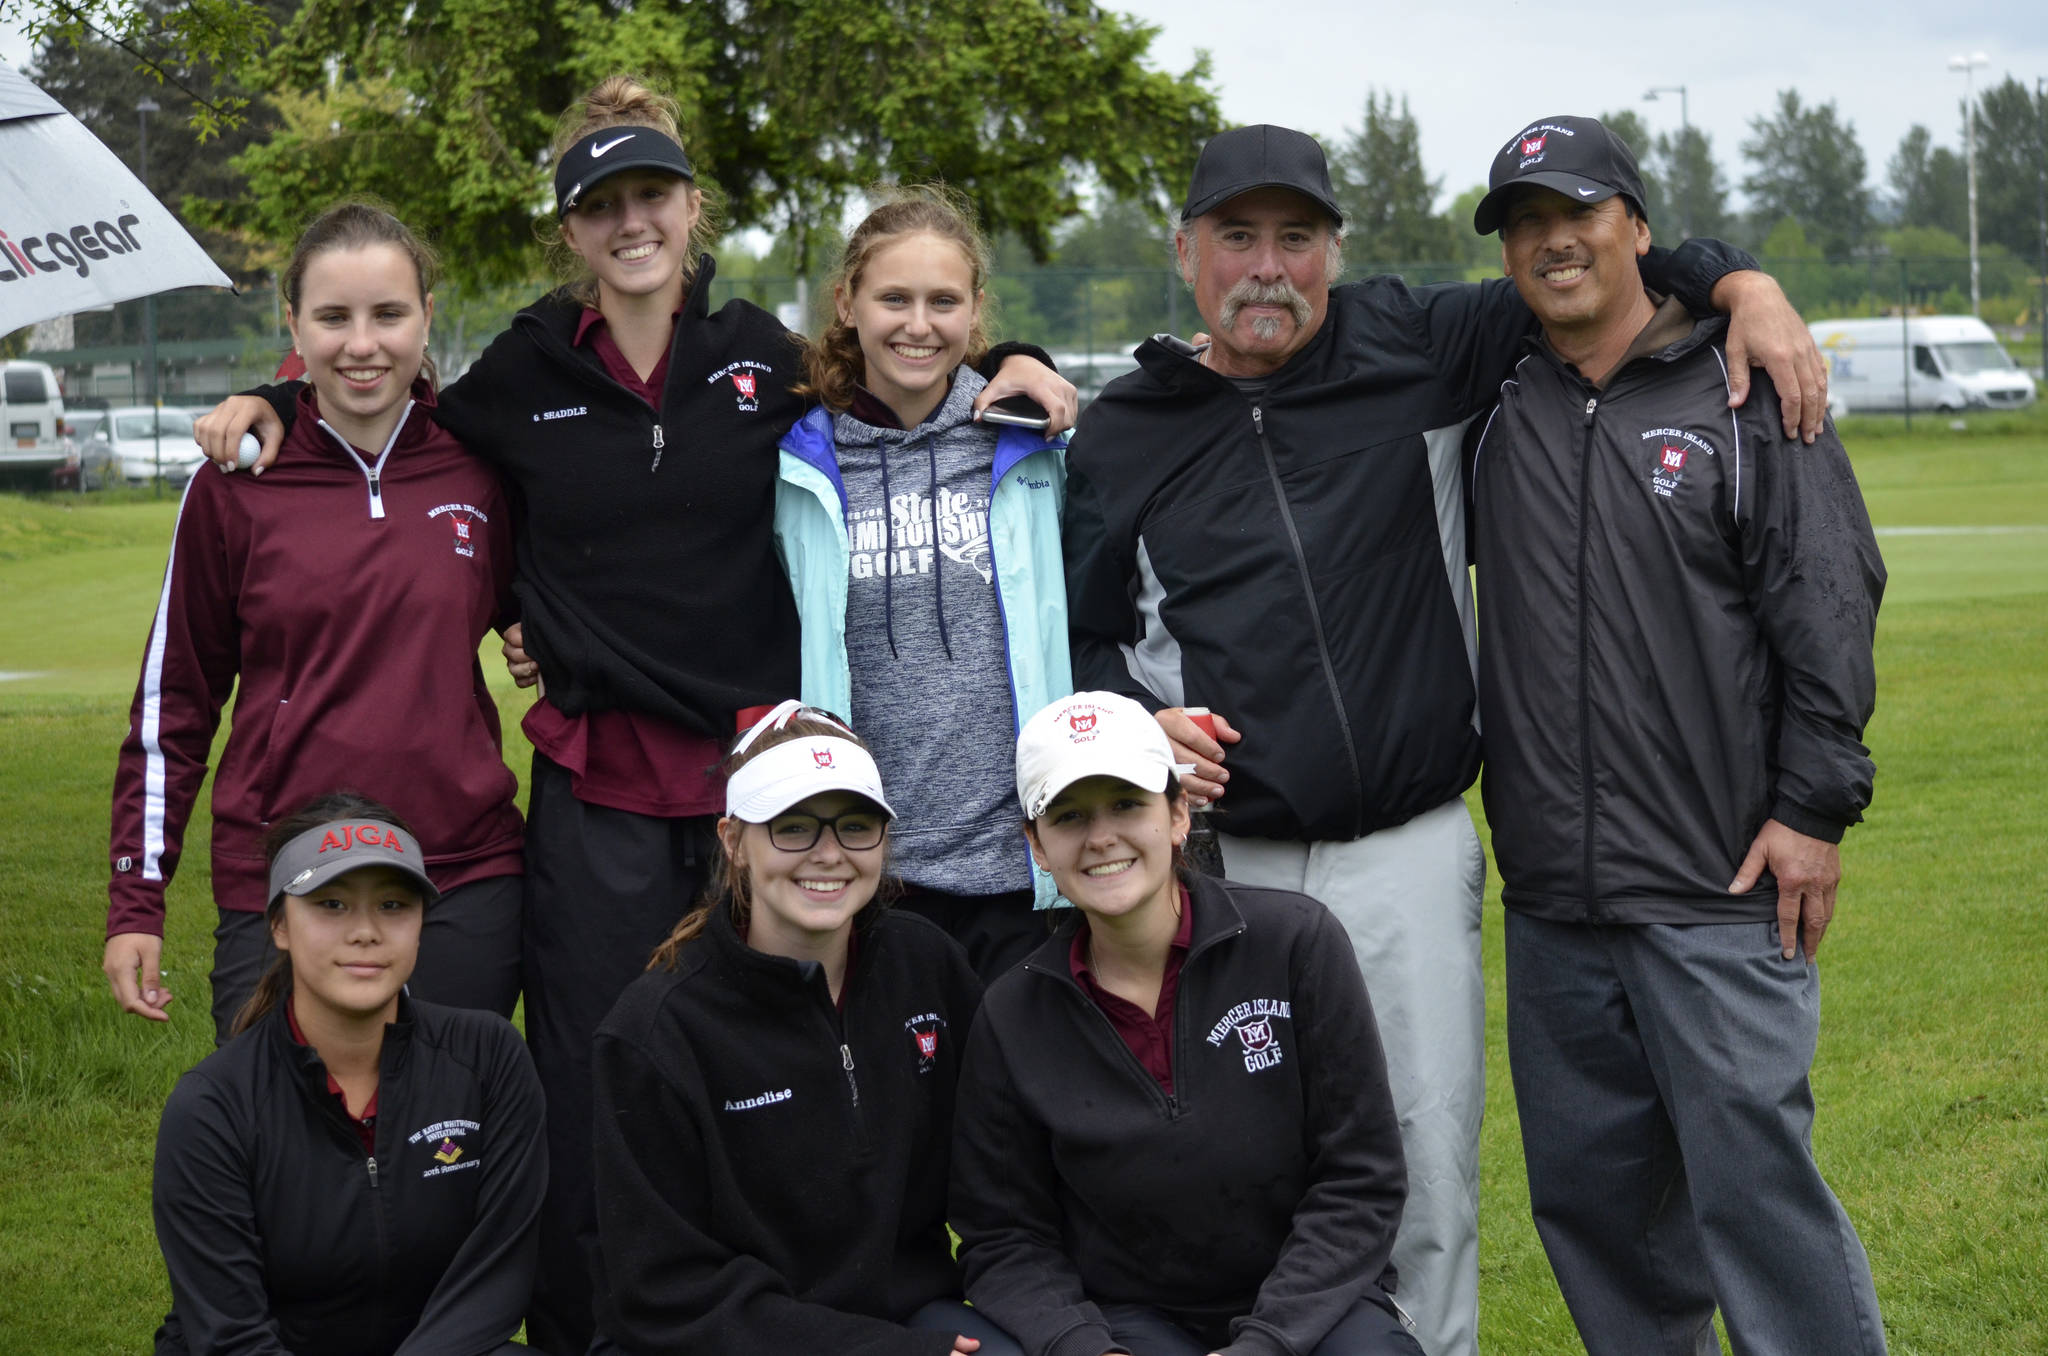 The Mercer Island Islanders girls golf team captured third place as a team at the 2019 3A Sea-King girls district golf tournament on May 13. The third place finish ensured the Islanders varsity golf team a berth at the Class 3A state tournament. Islanders’ golfers pictured in the above photo are Gihoe Seo, Annelise Rorem, Katelyn Travis, Yumi Baston, Grace Shaddle and Lilly Pruchno. Mercer Island coaches Don Papasedero and Tim Okamura are pictured on the right.